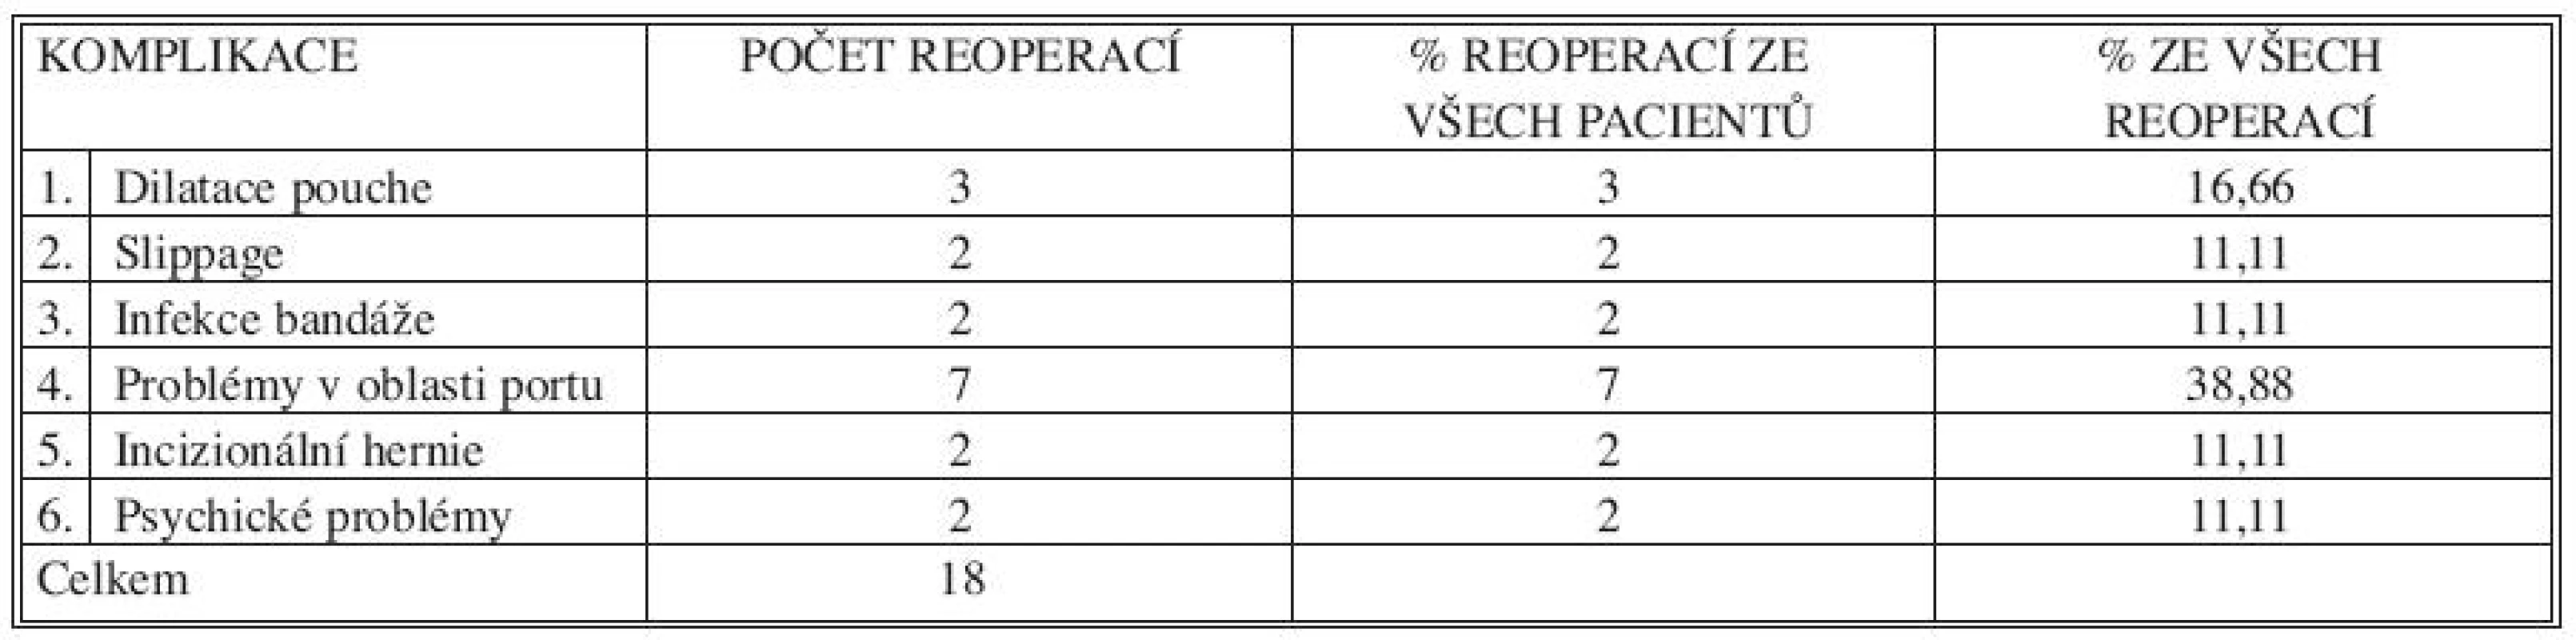 Reoperace v souboru 100 pacientů s LAGB
Tab. 3. Reoperations among 100 LAGB patients